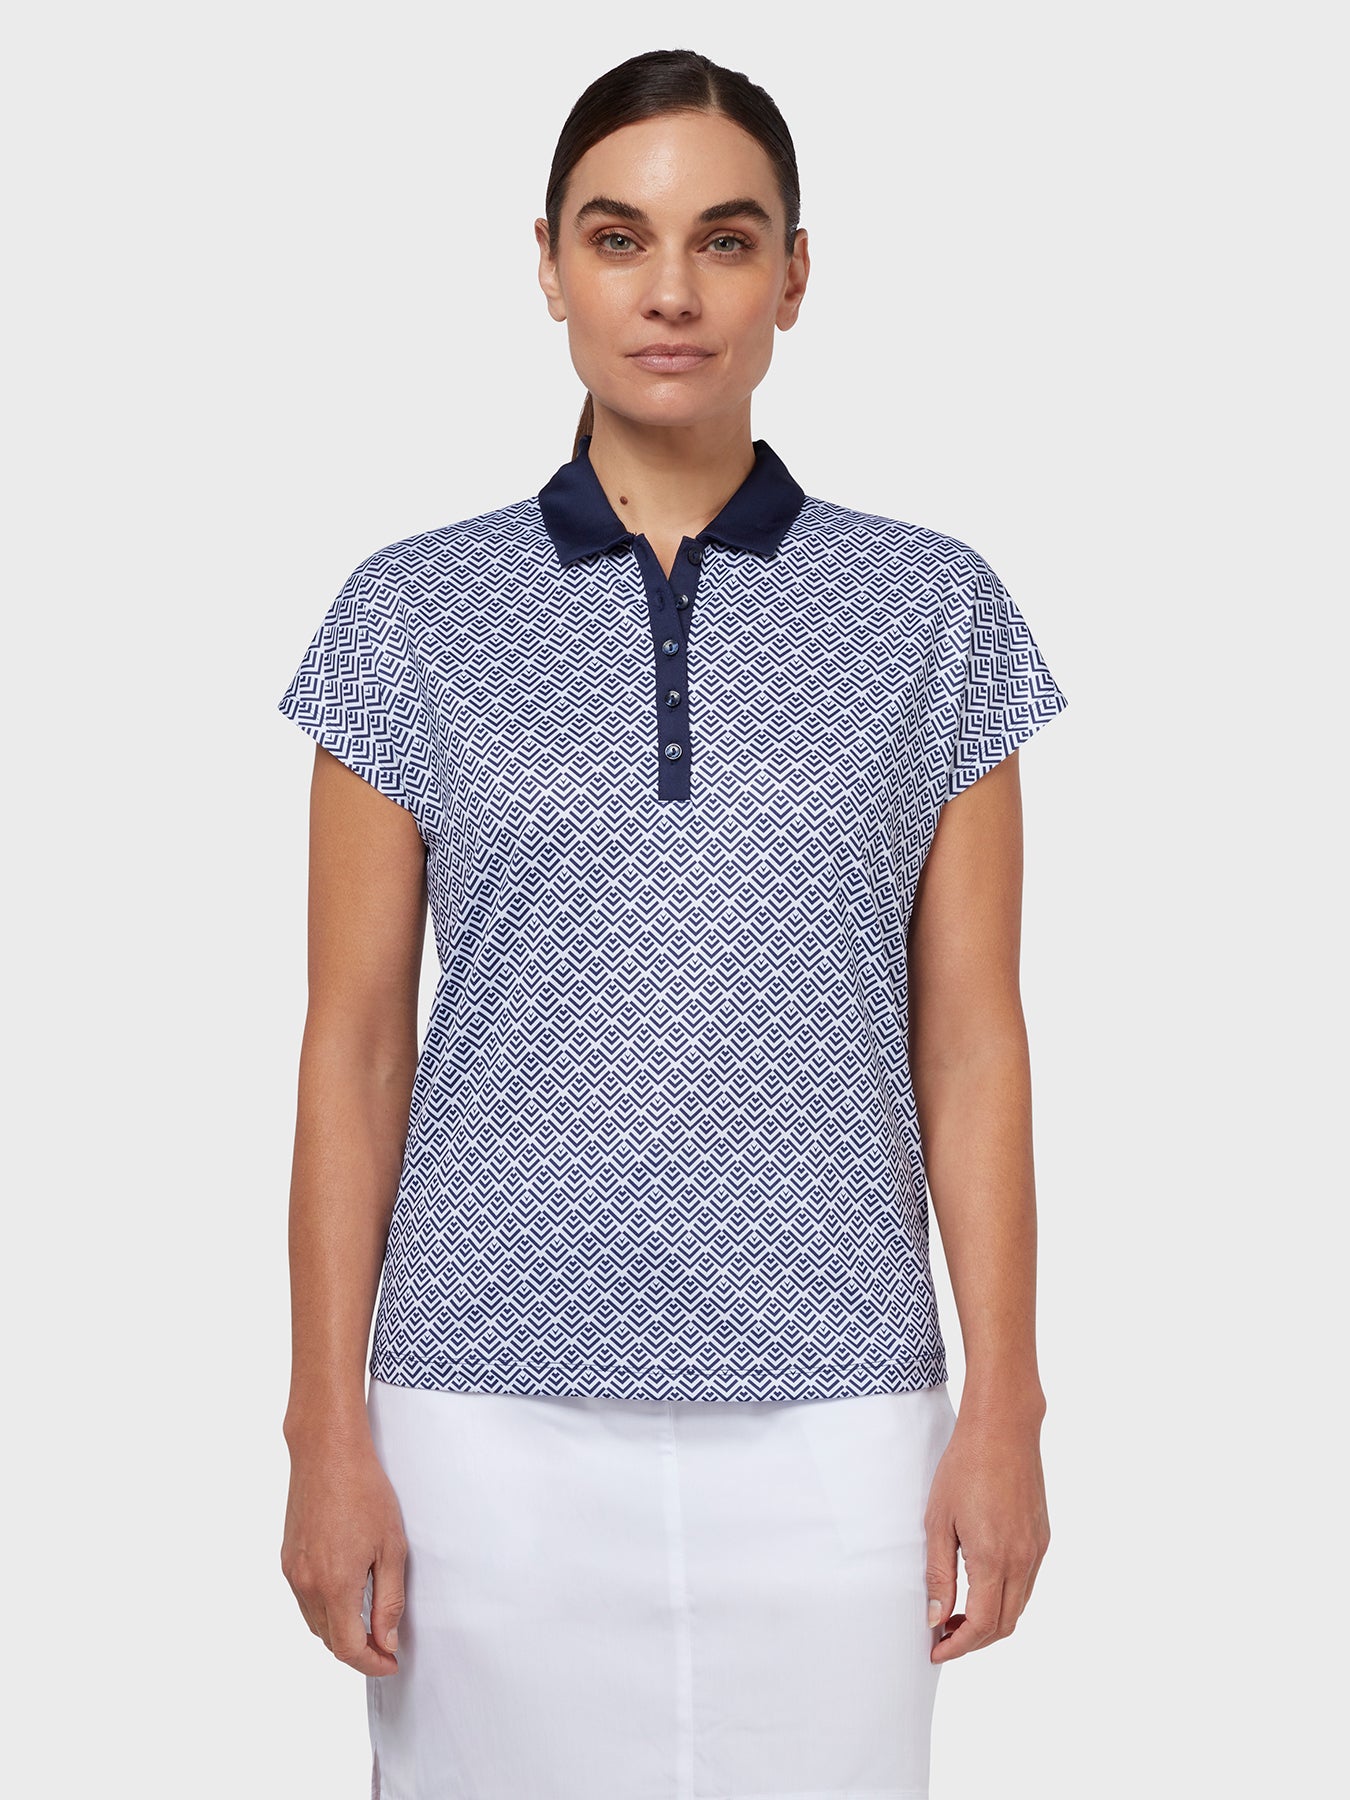 View Chev Printed Womens Polo In Blue Geo Brilliant White XL information